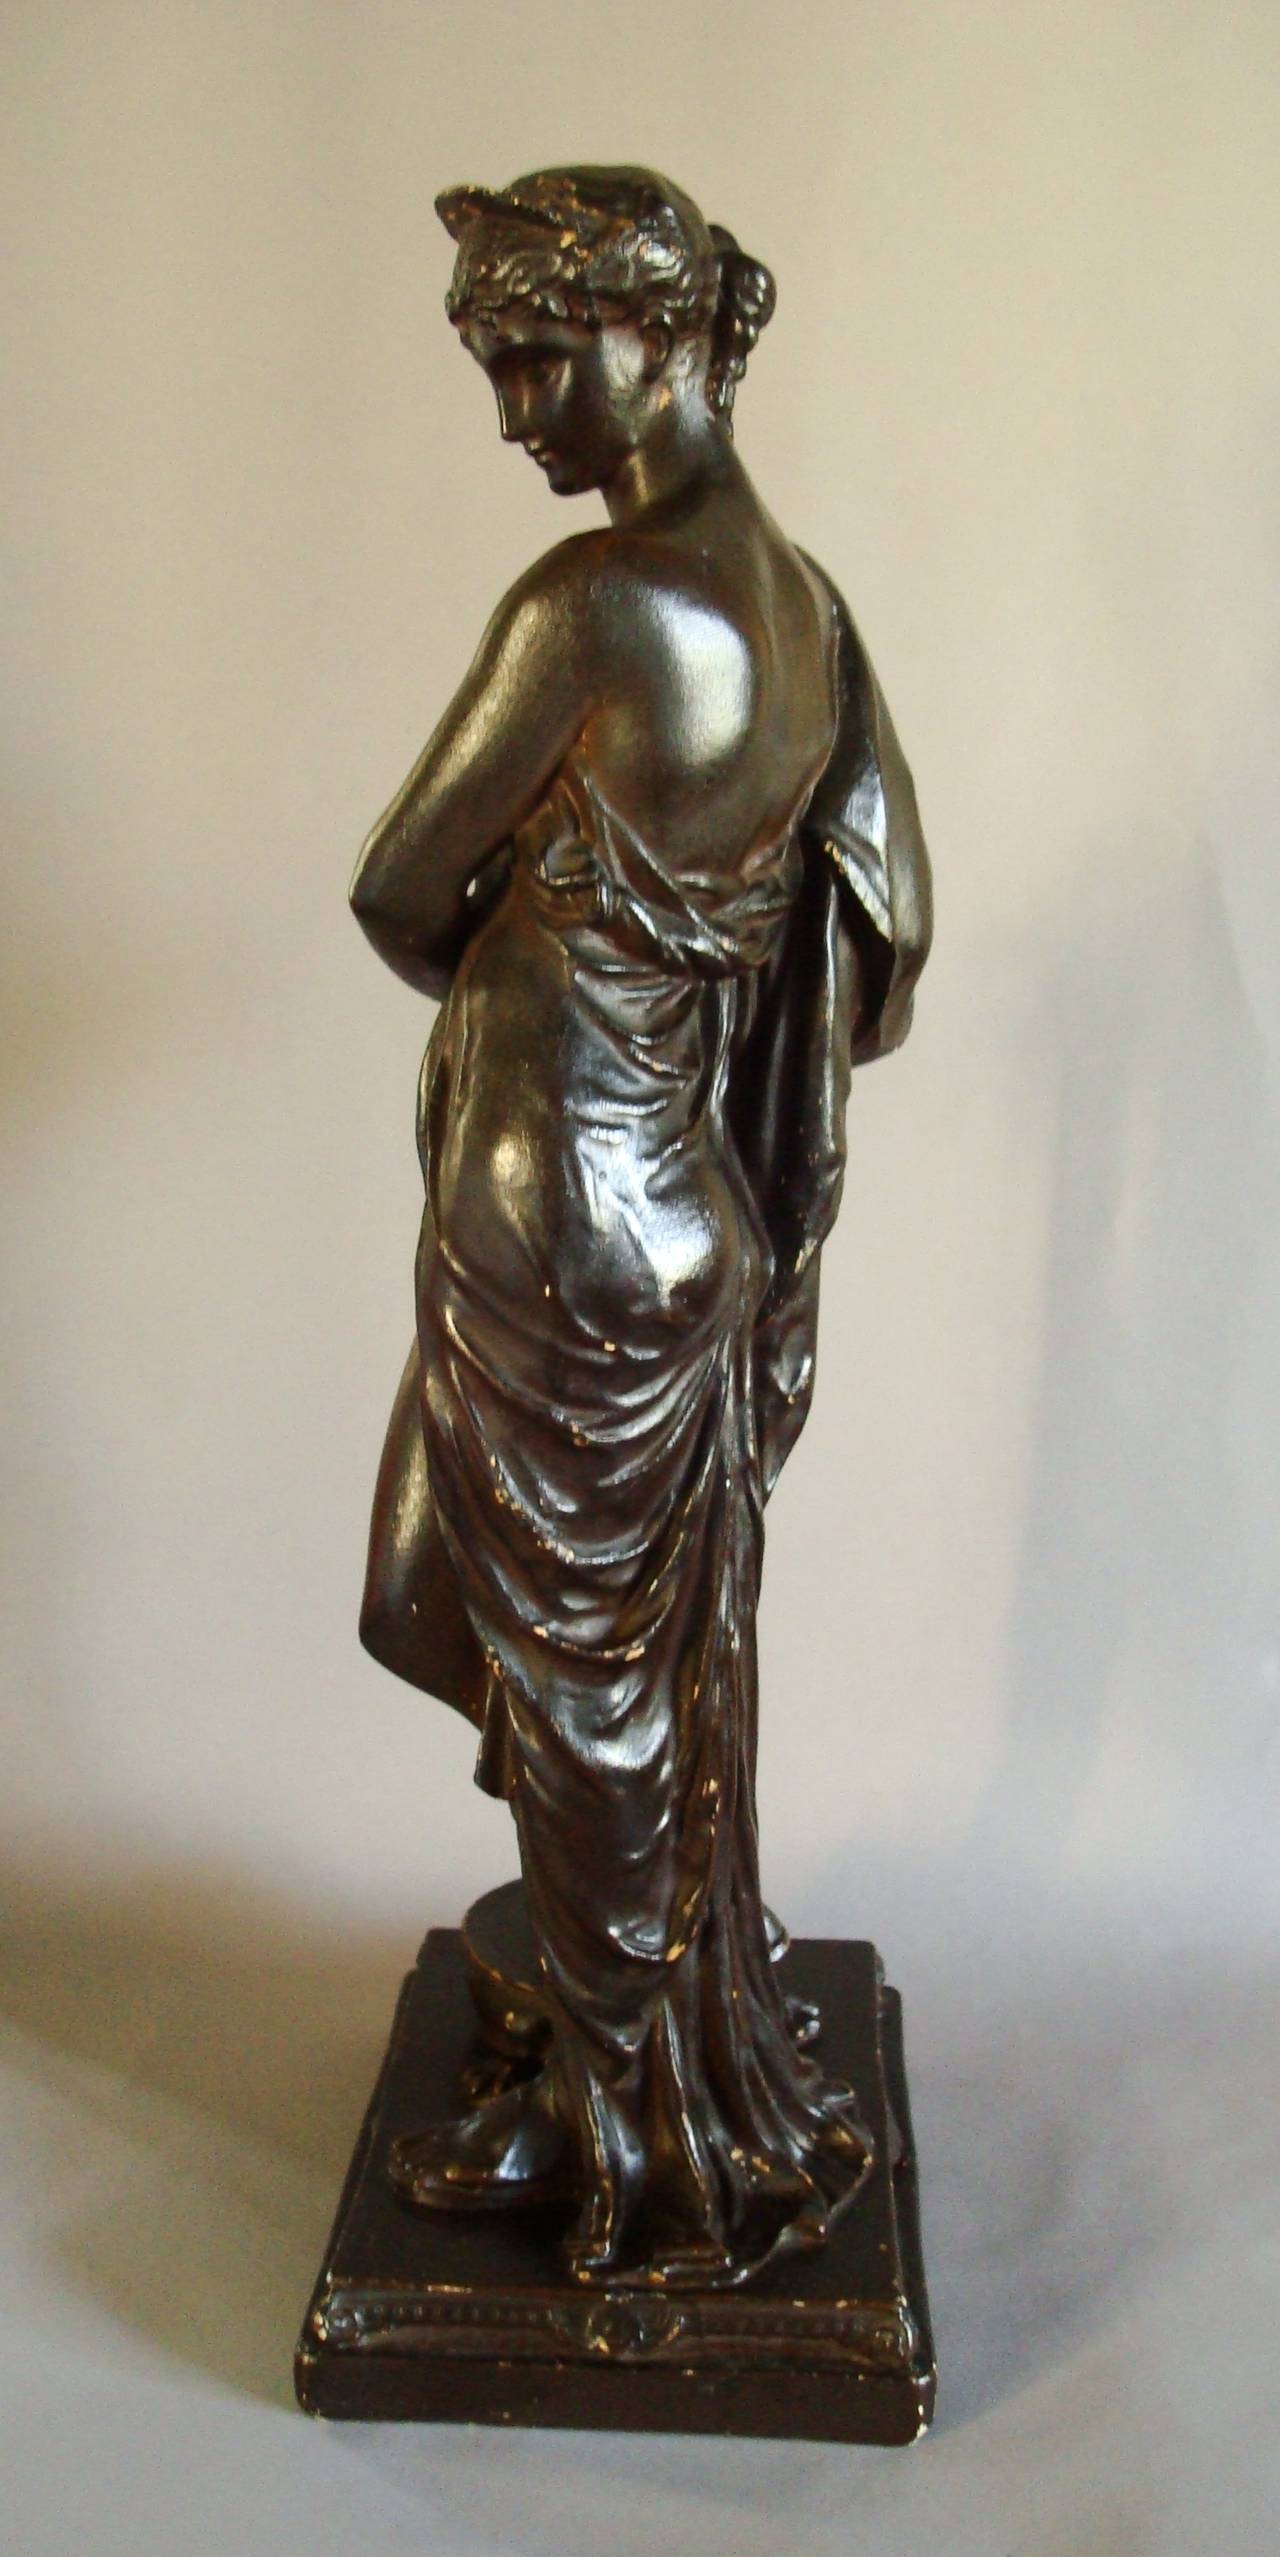 Regency 'Bronzed' Sculpture of a Classical Figure In Good Condition For Sale In Moreton-in-Marsh, Gloucestershire